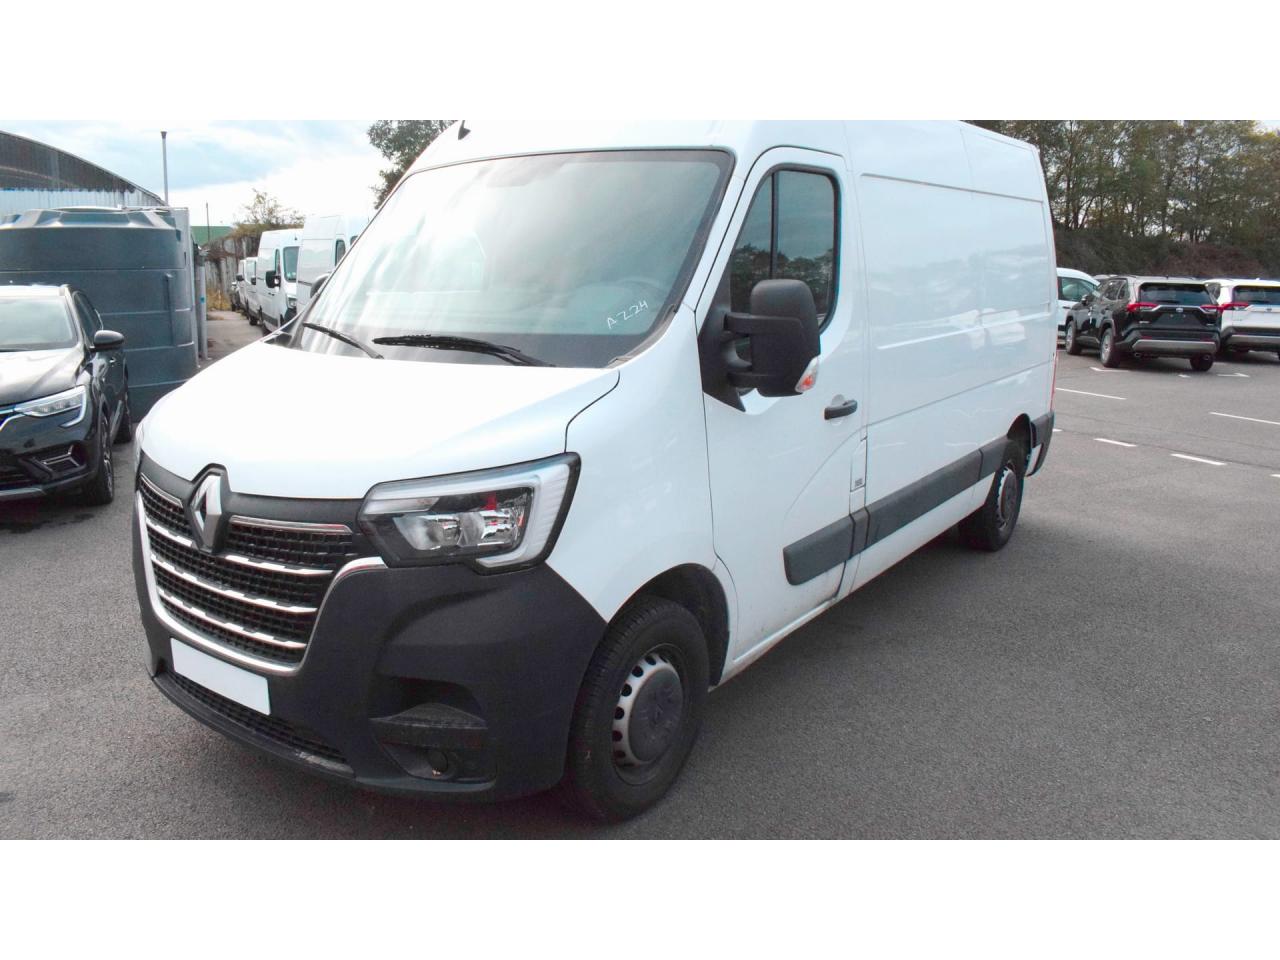 RENAULT-MASTER-Master Grand Confort F3500 L2H2 2.3 dCi - 135  III FOURGON Fourgon L2H2 Traction PHASE 3